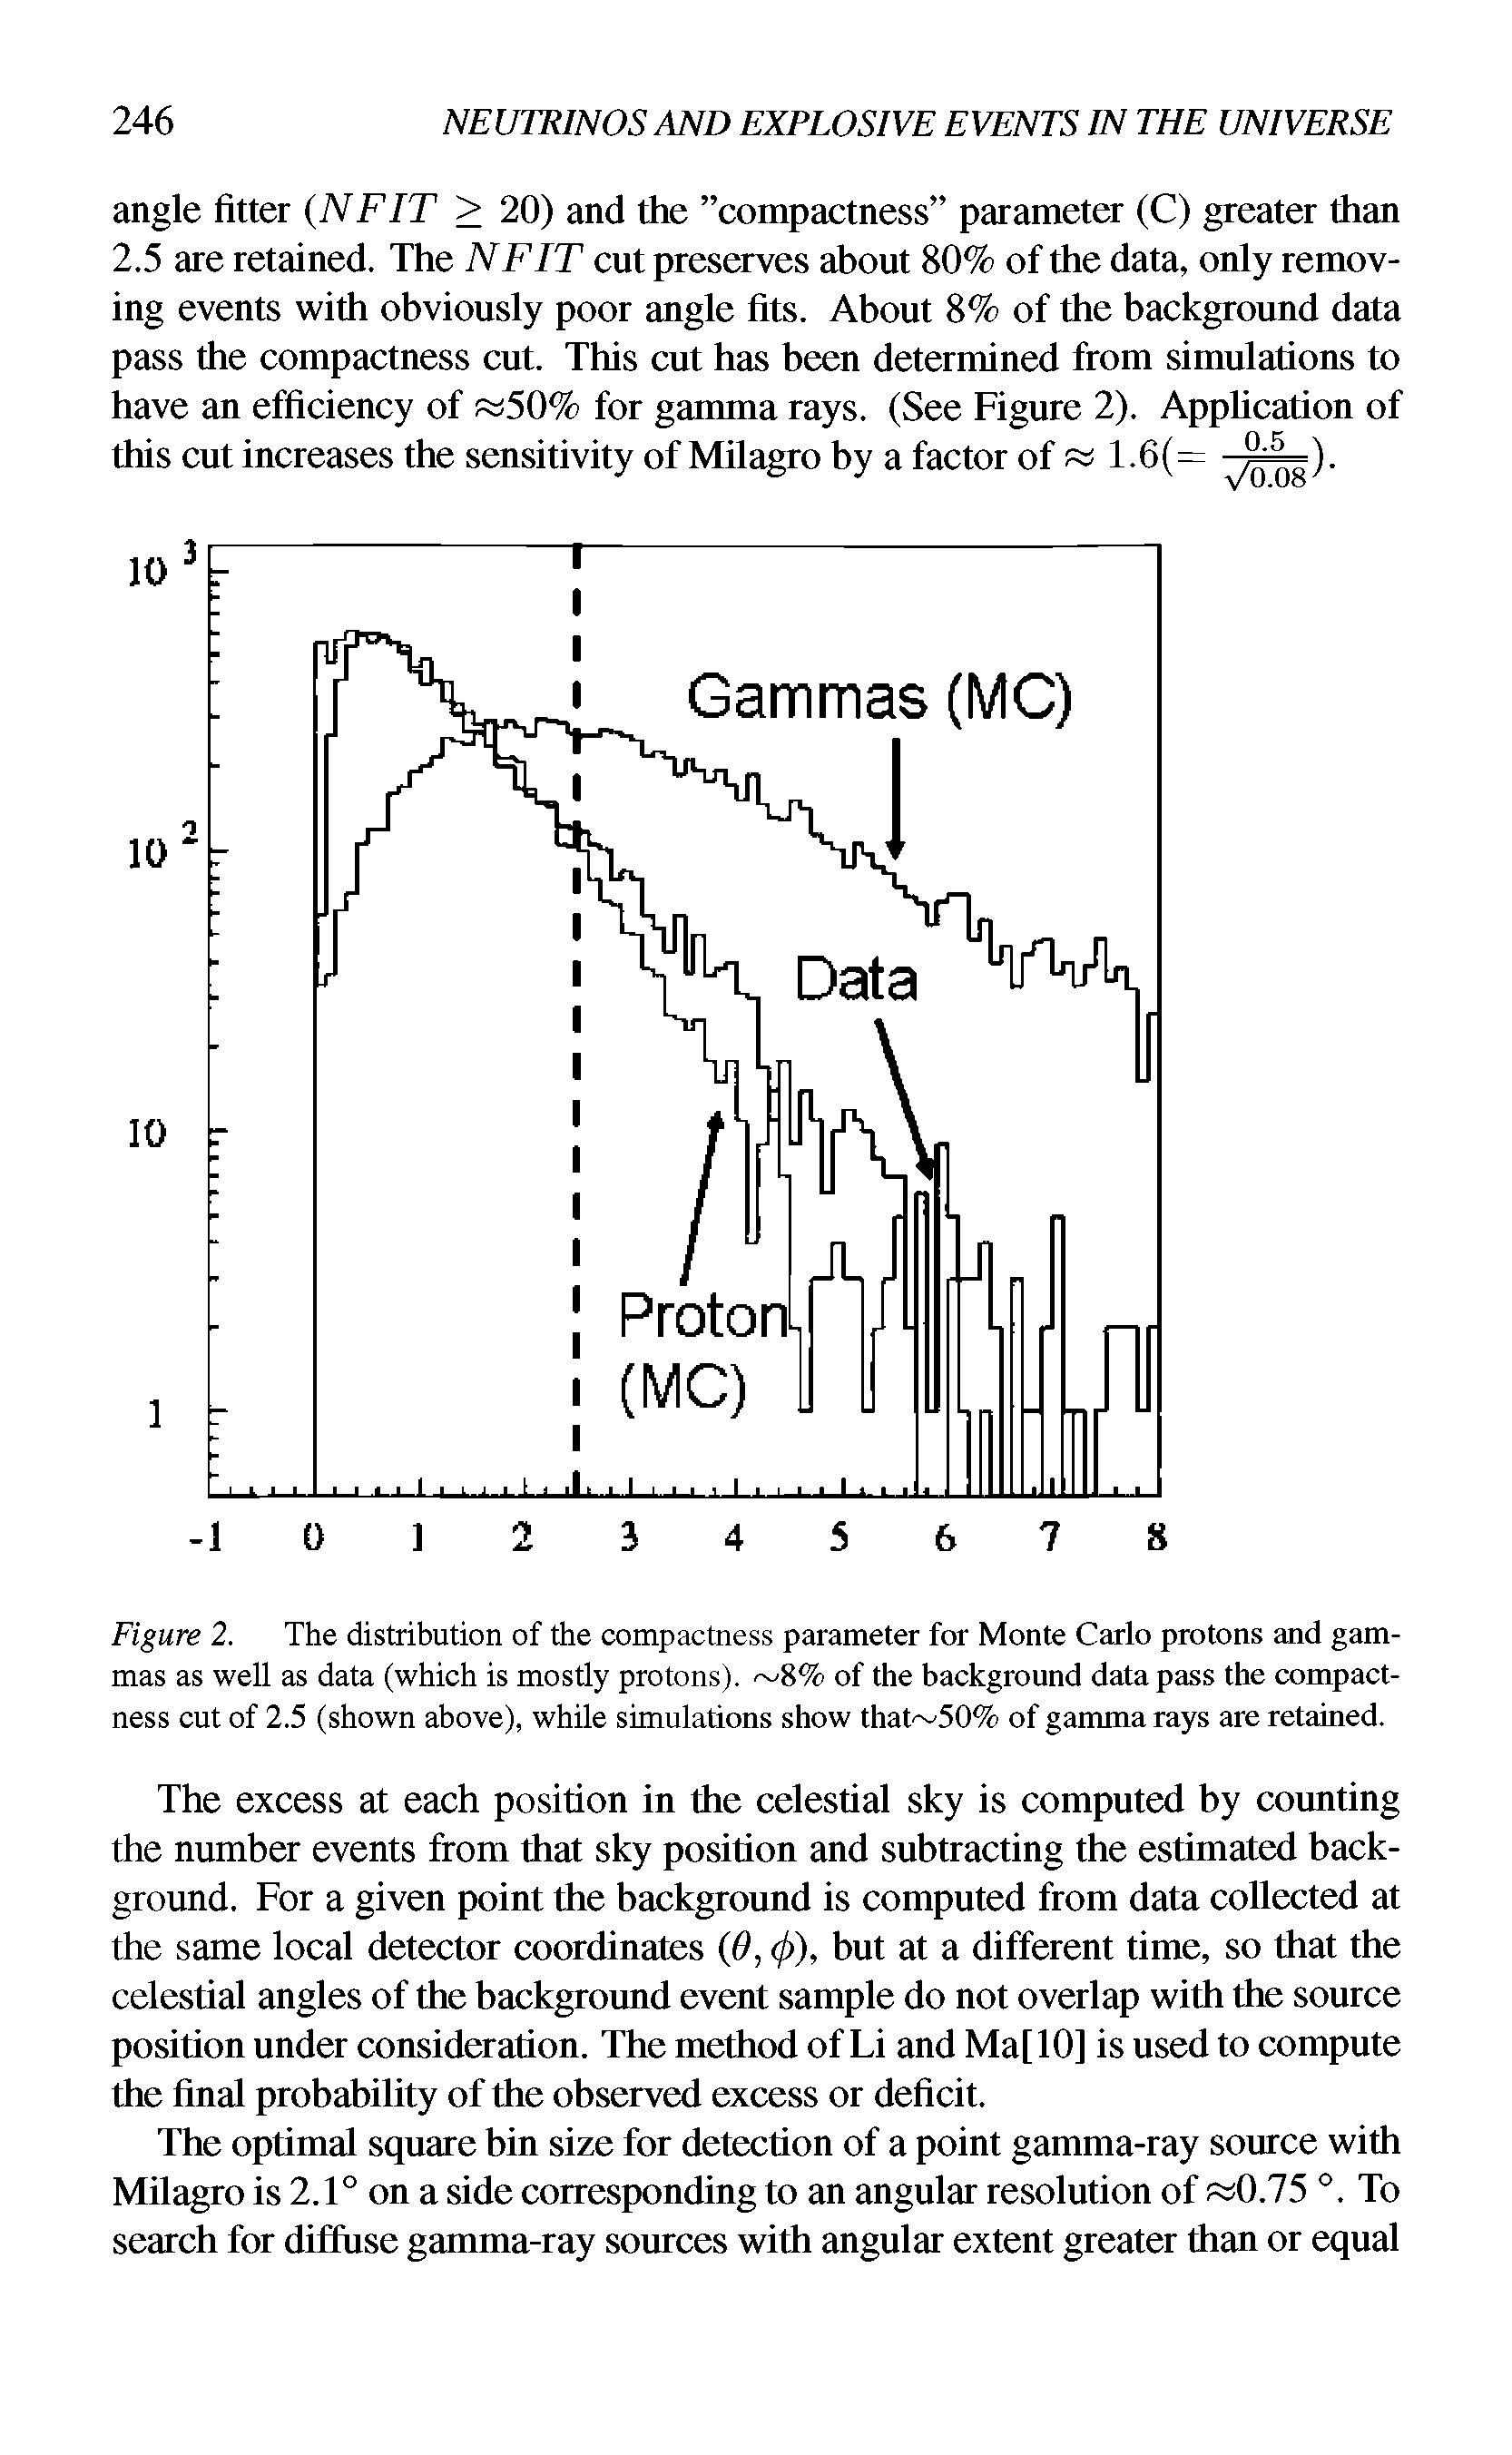 Figure 2. The distribution of the compactness parameter for Monte Carlo protons and gammas as well as data (which is mostly protons). 8% of the background data pass the compactness cut of 2.5 (shown above), while simulations show that 50% of gamma rays are retained.